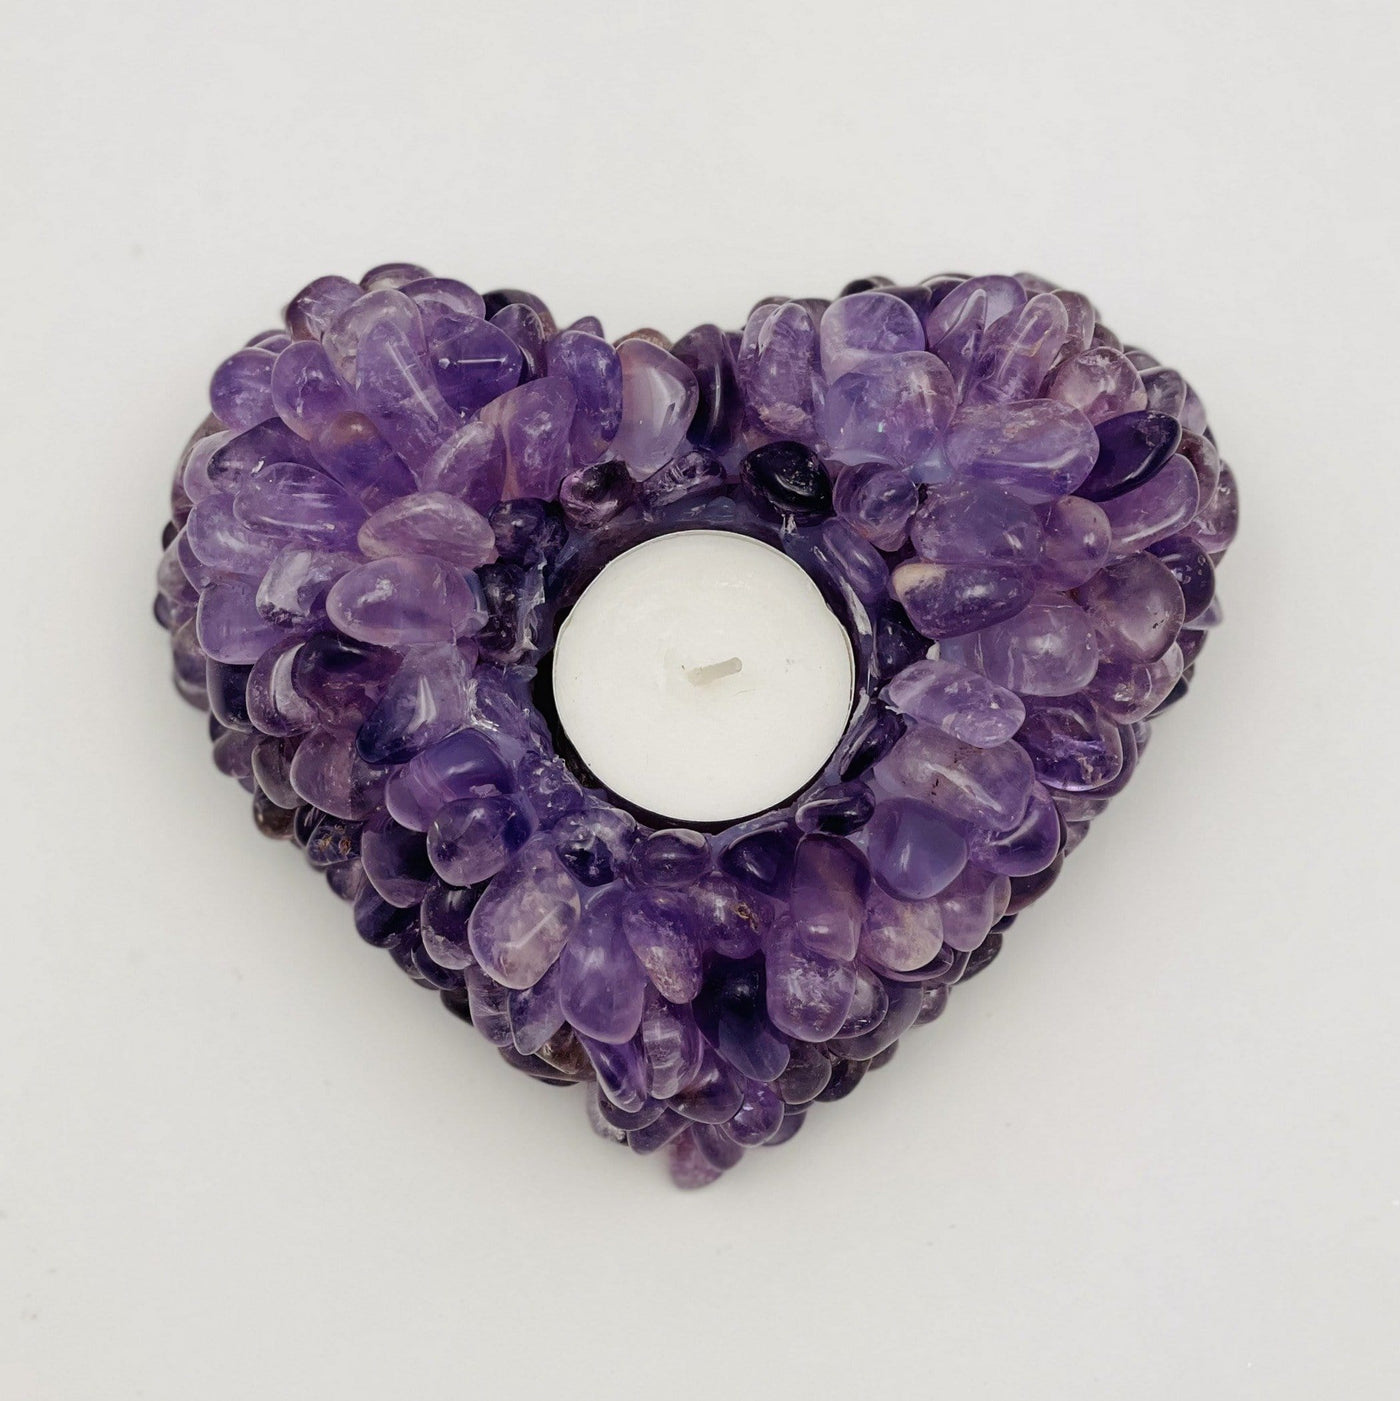 top view of amethyst tumbled stone heart candle holder on white background